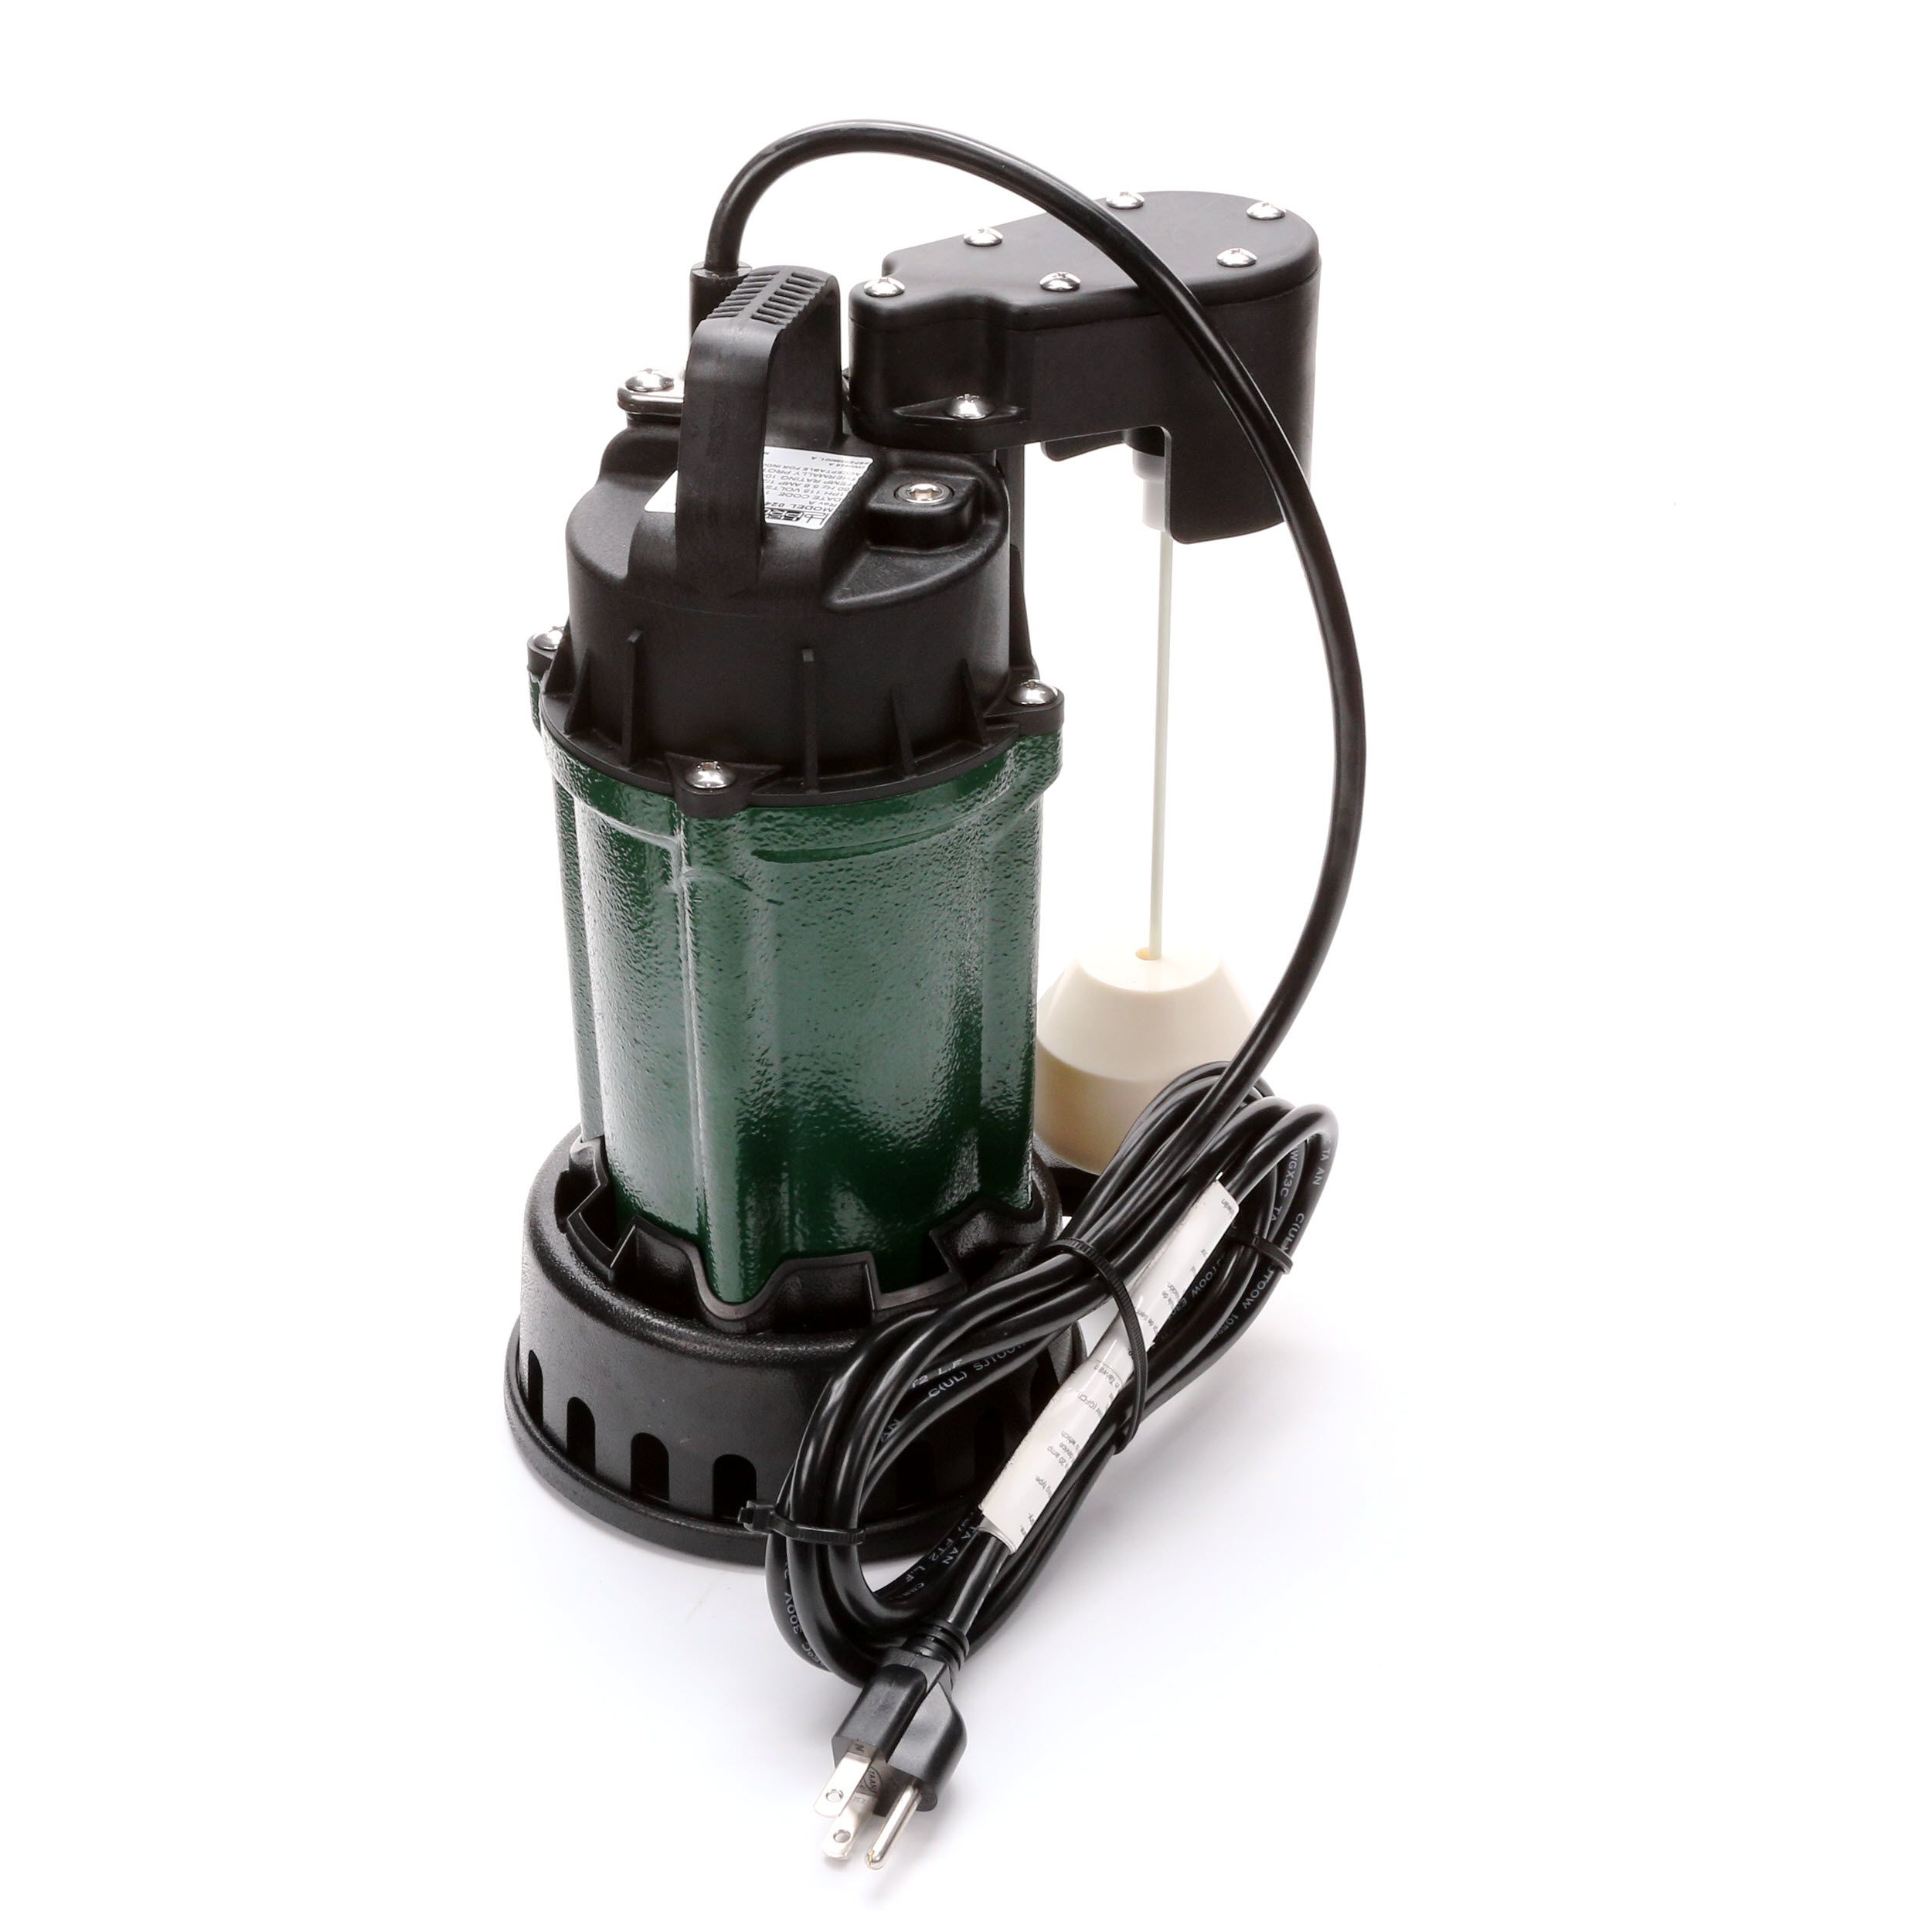 H2O PRO 1/2 HP Cast Iron Submersible Sump Pump #024489 